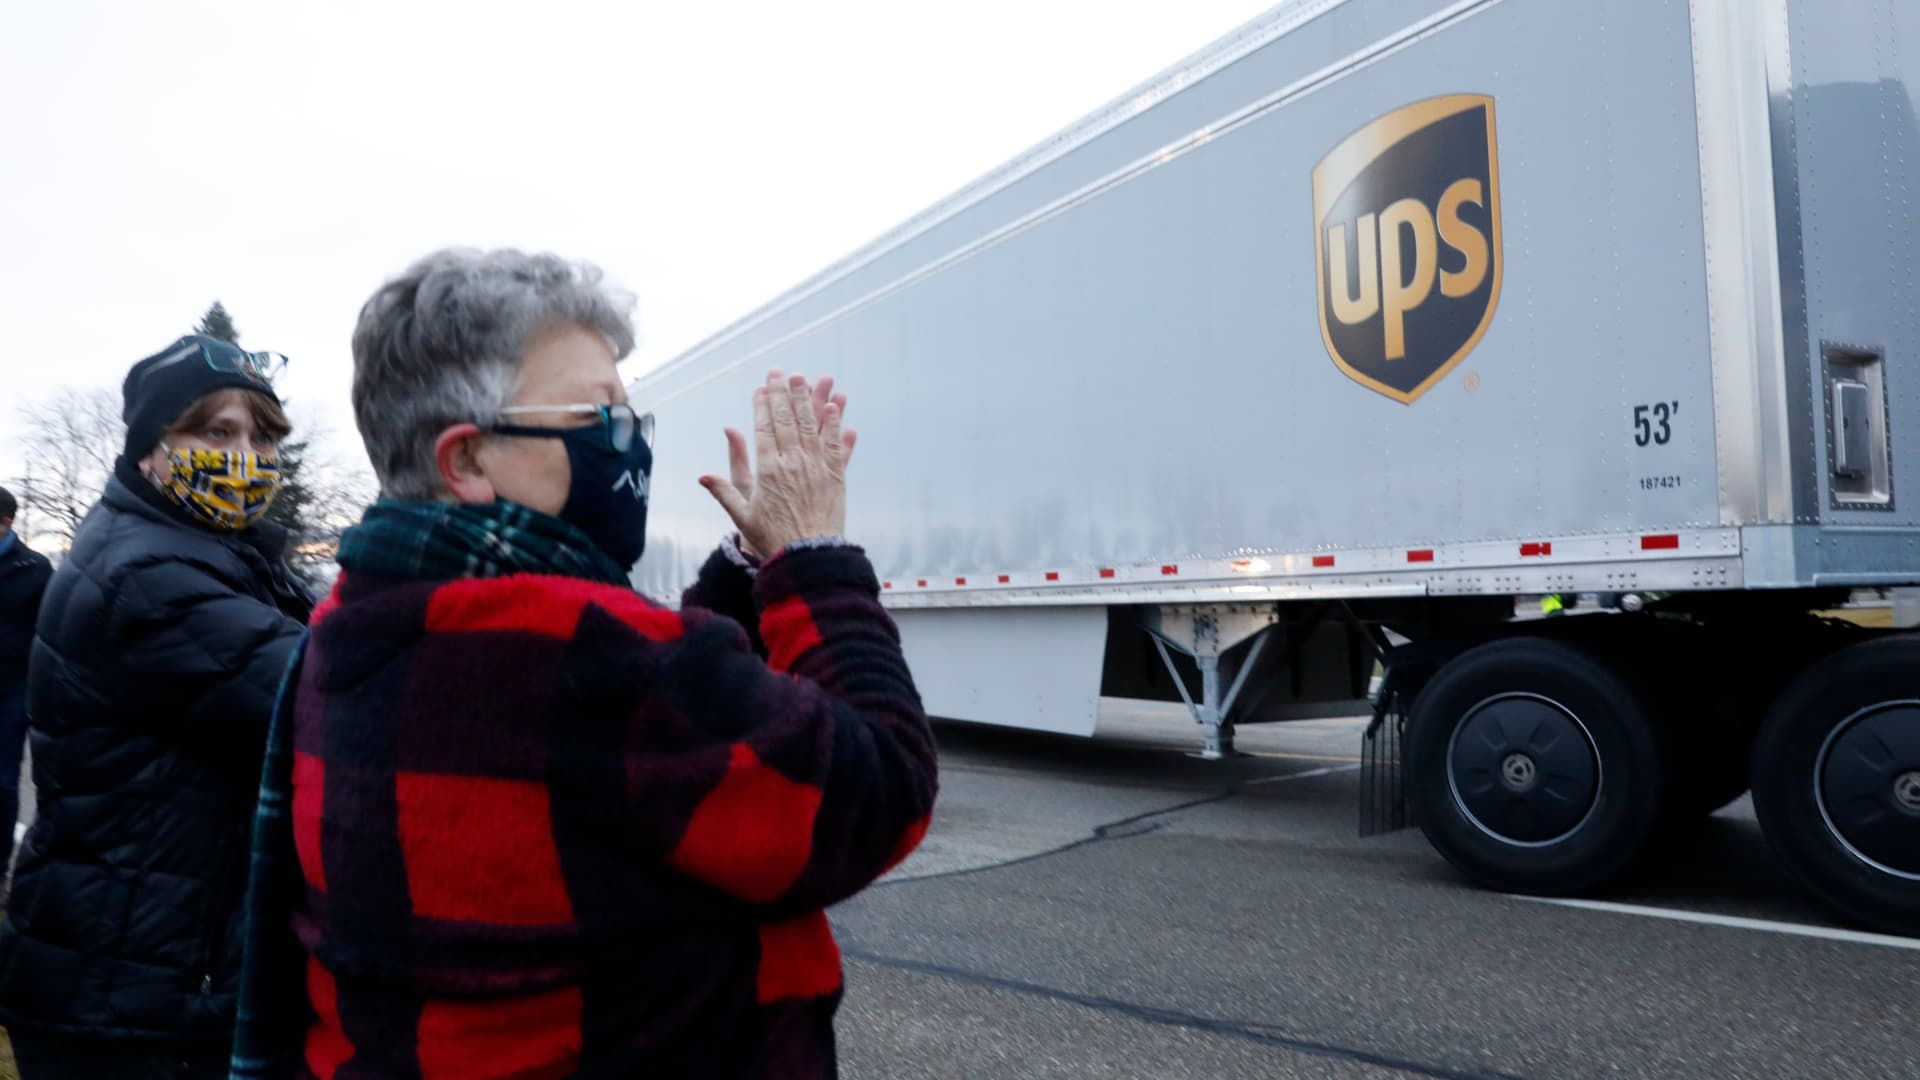 Nancy Galloway (L) and Susan Deur cheer as trucks carrying the first shipment of the Covid-19 vaccine that is being escorted by the US Marshals Service, leave Pfizer's Global Supply facility in Kalamazoo, Michigan on December 13, 2020.